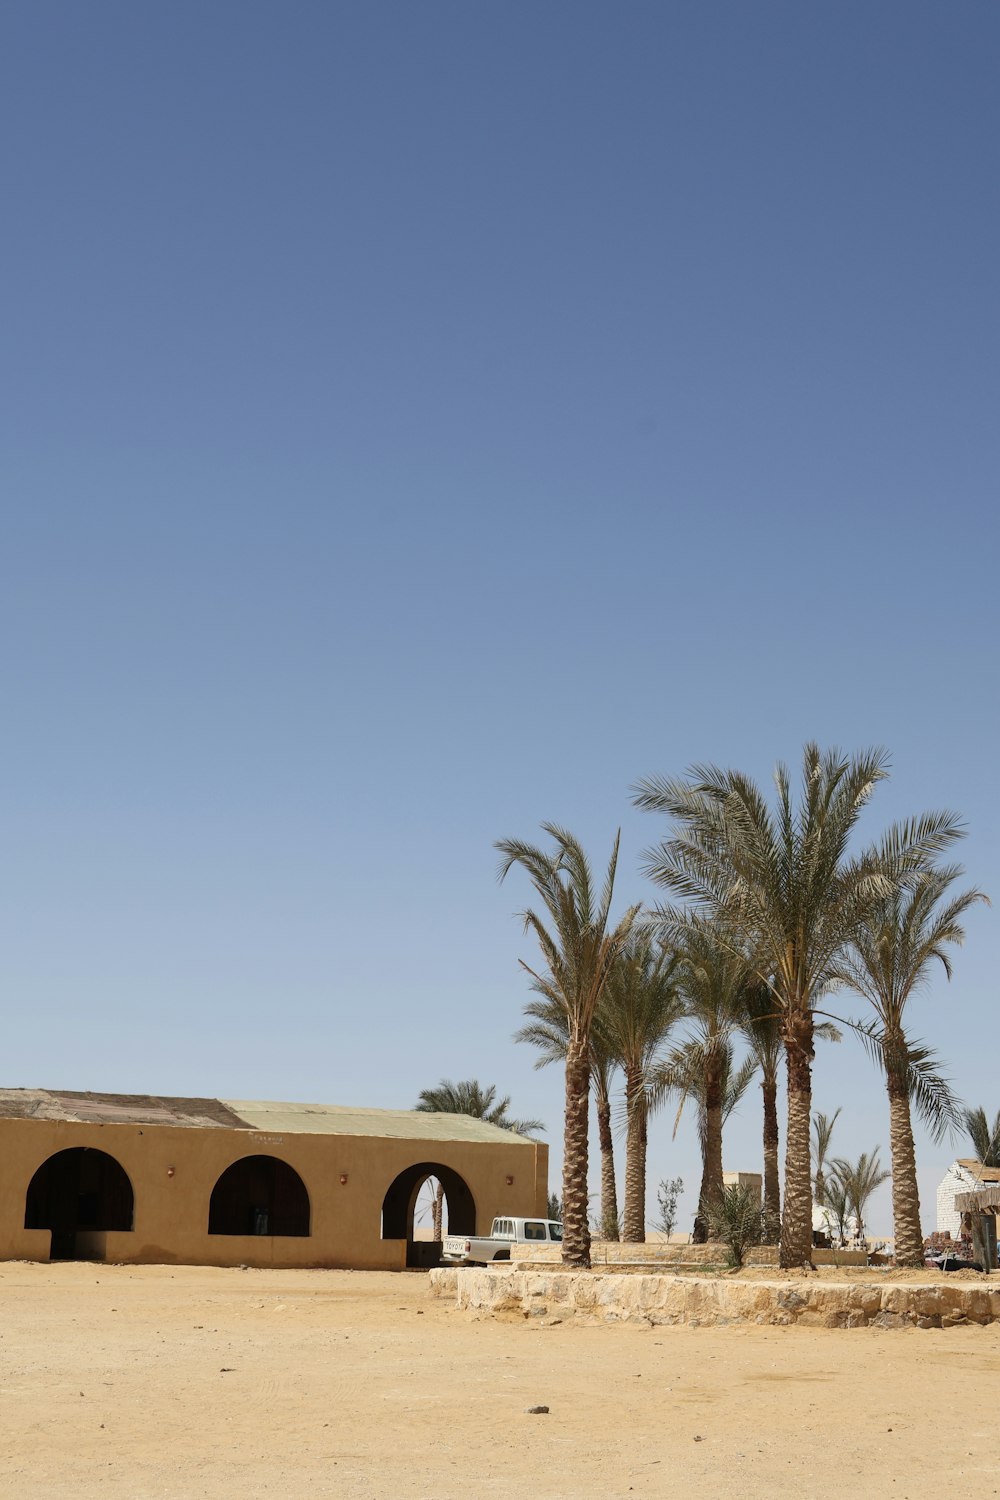 a desert area with palm trees and a building